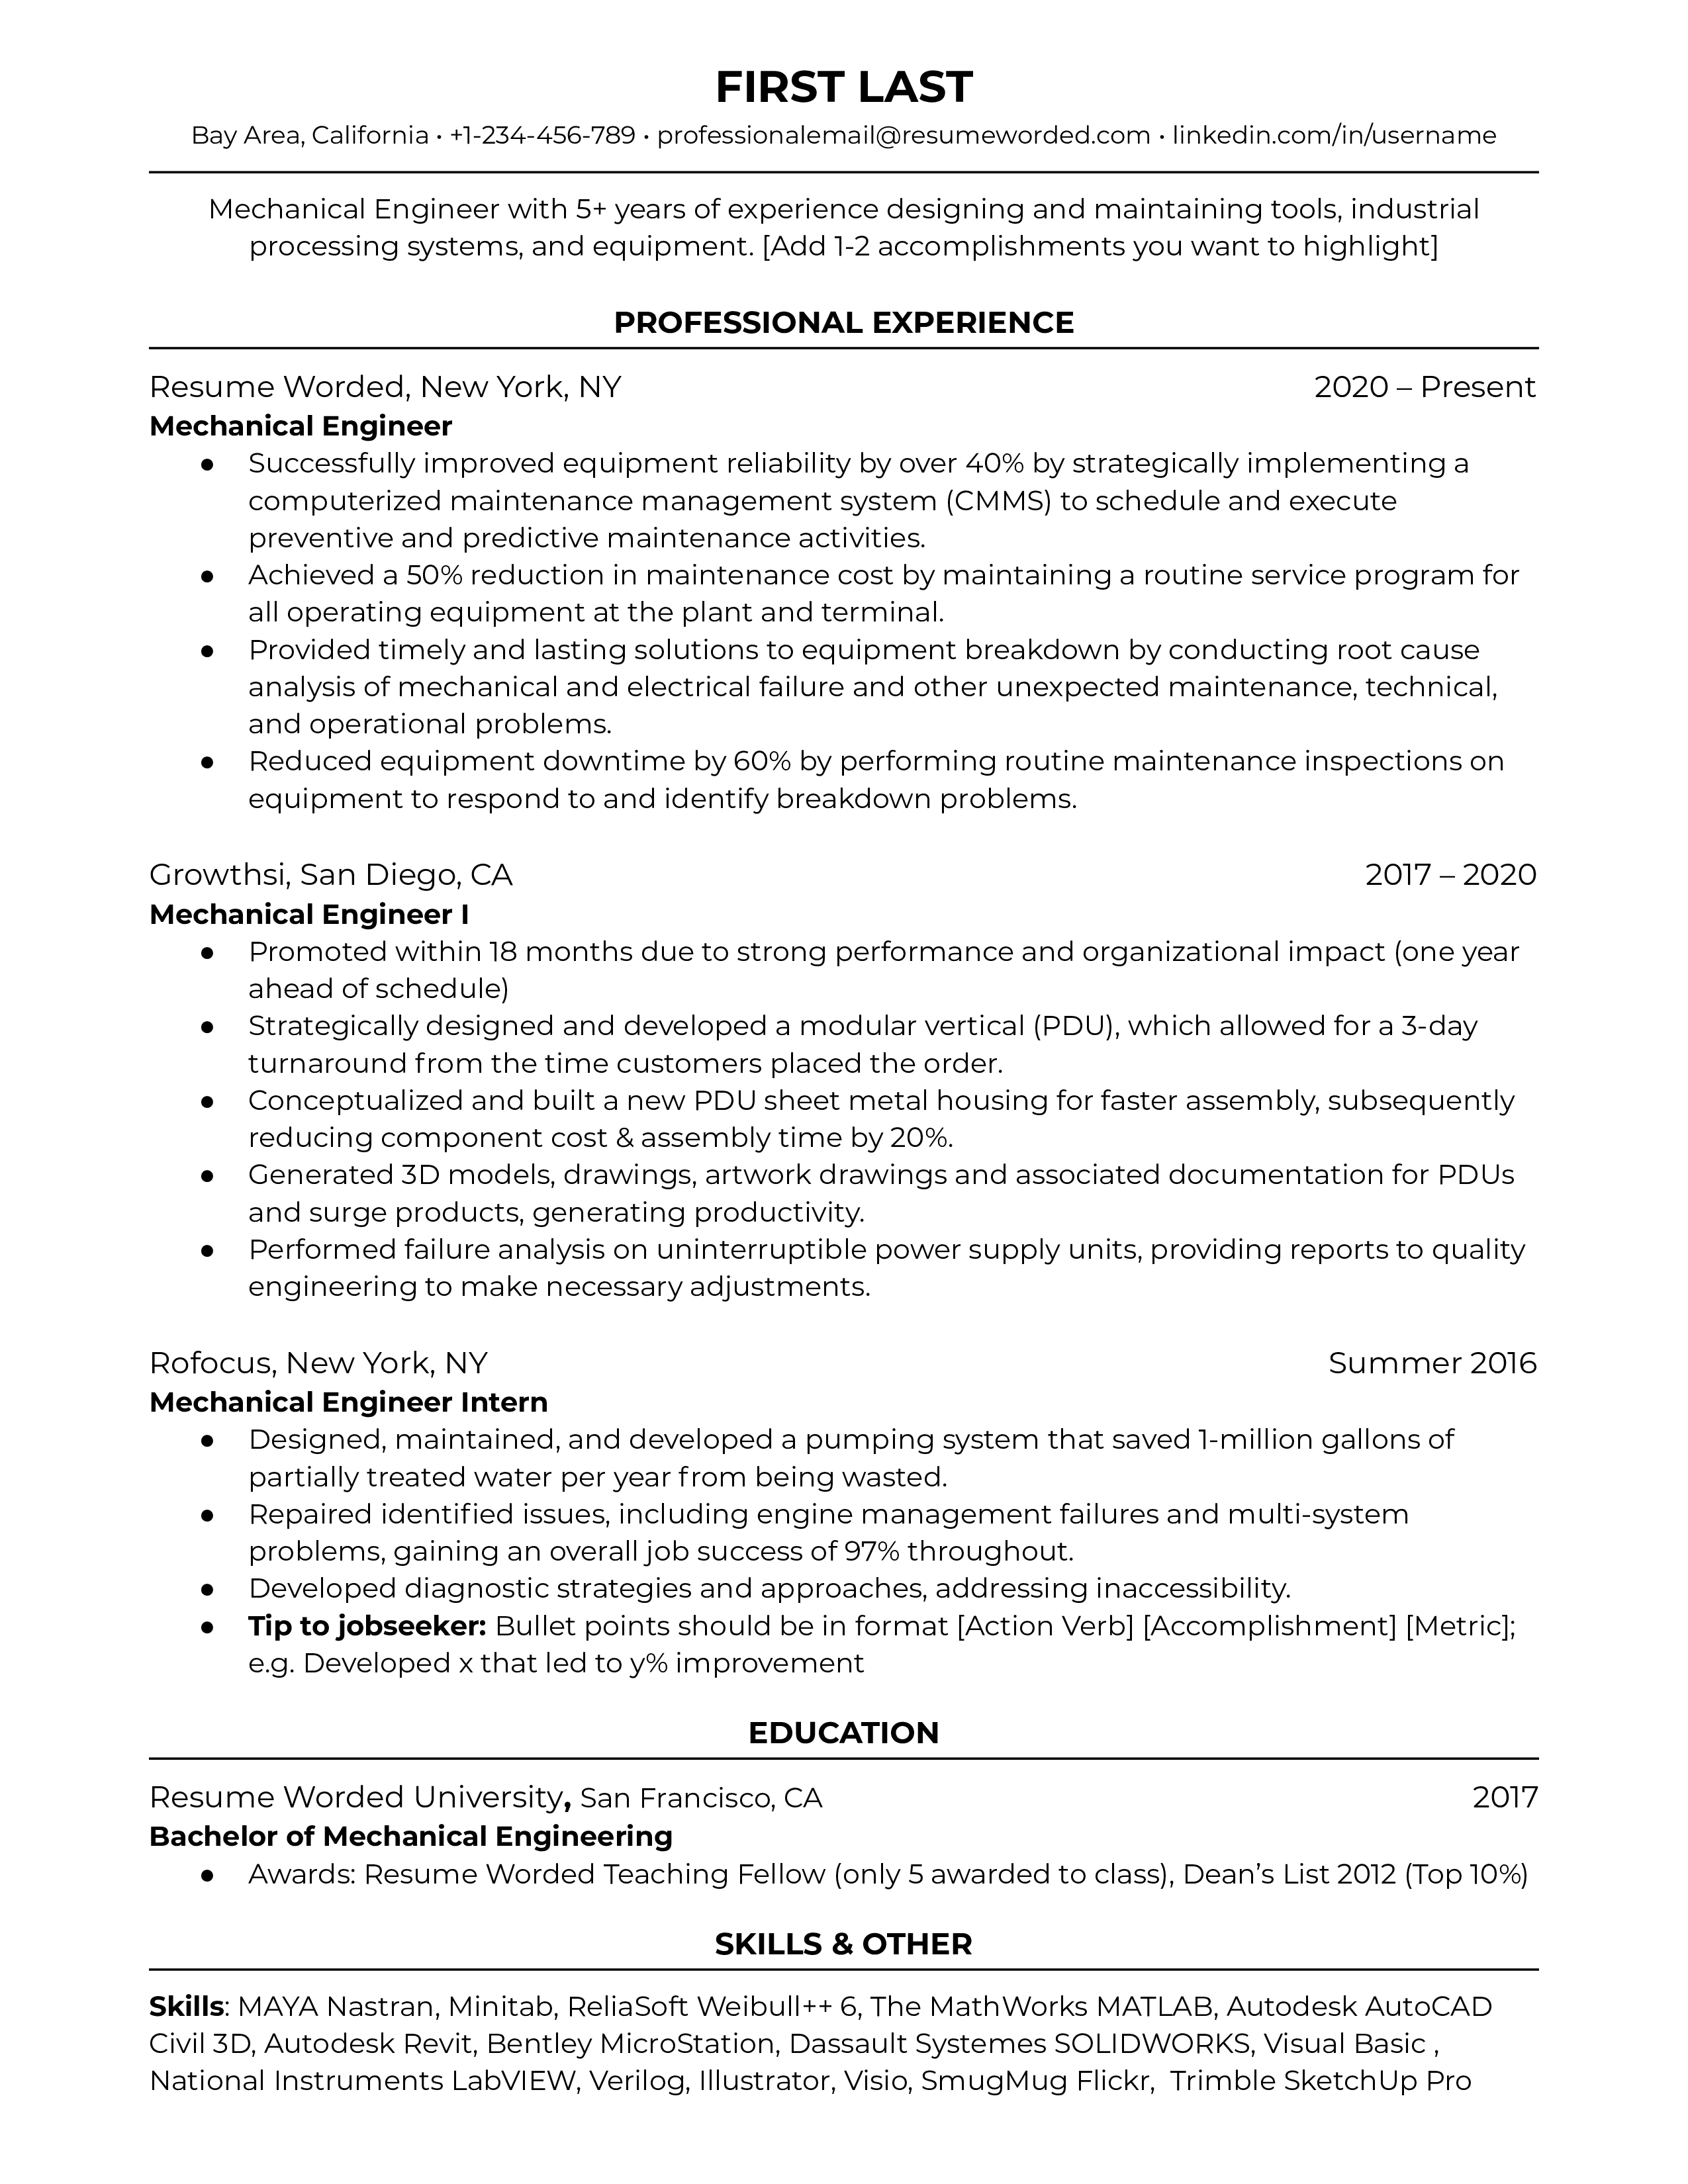 6 Mechanical Engineer Resume Examples for 2022  Resume Worded